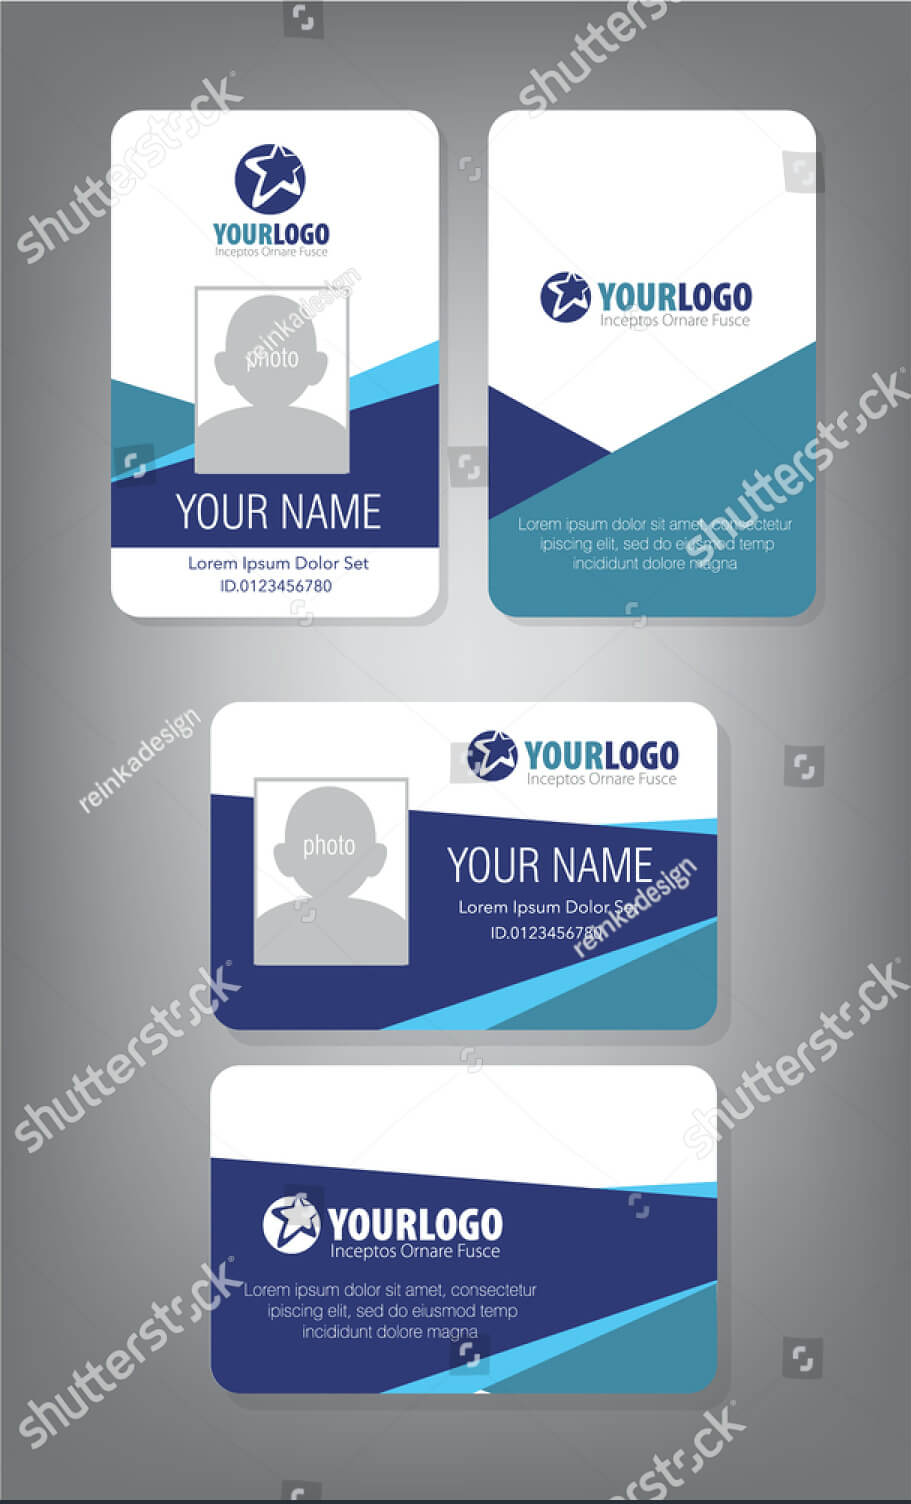 43+ Professional Id Card Designs - Psd, Eps, Ai, Word | Free For Portrait Id Card Template